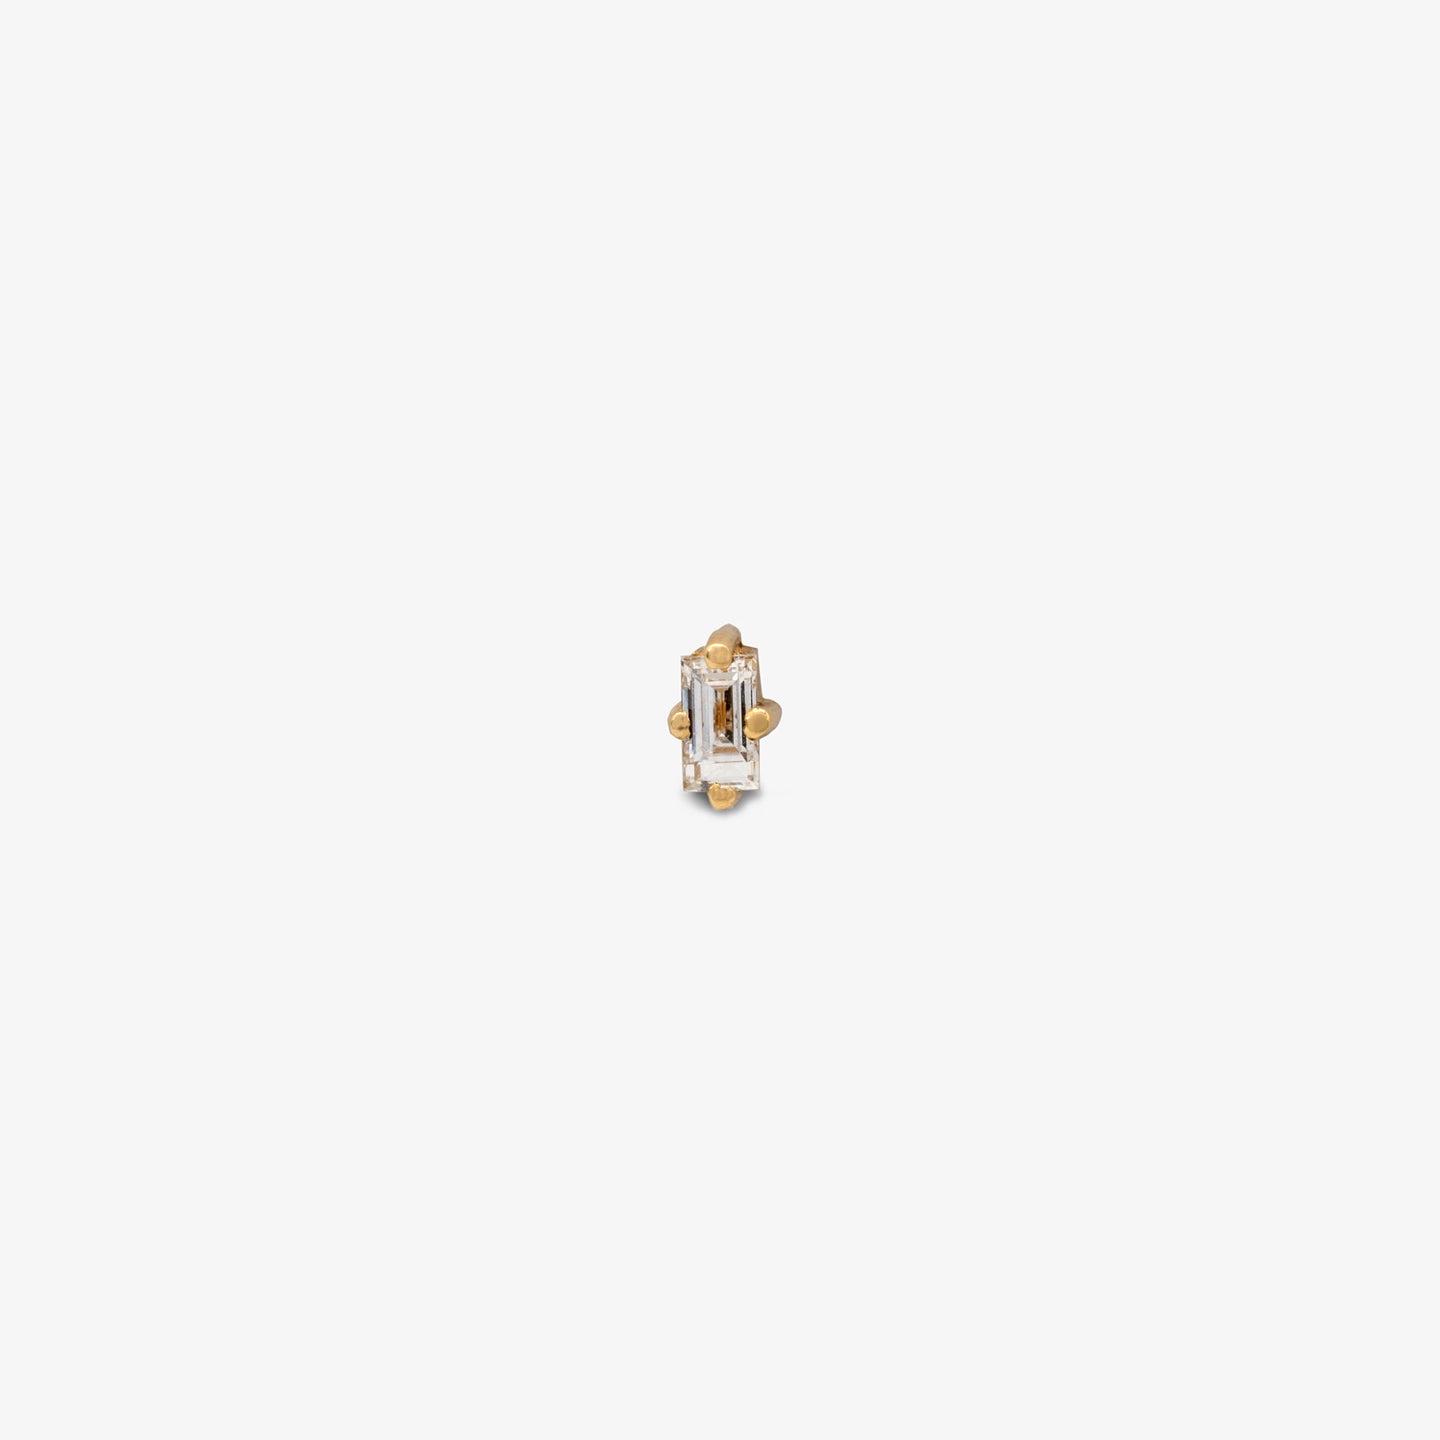 This is a small 18k gold stud with a square cut diamond color:18k gold/diamond